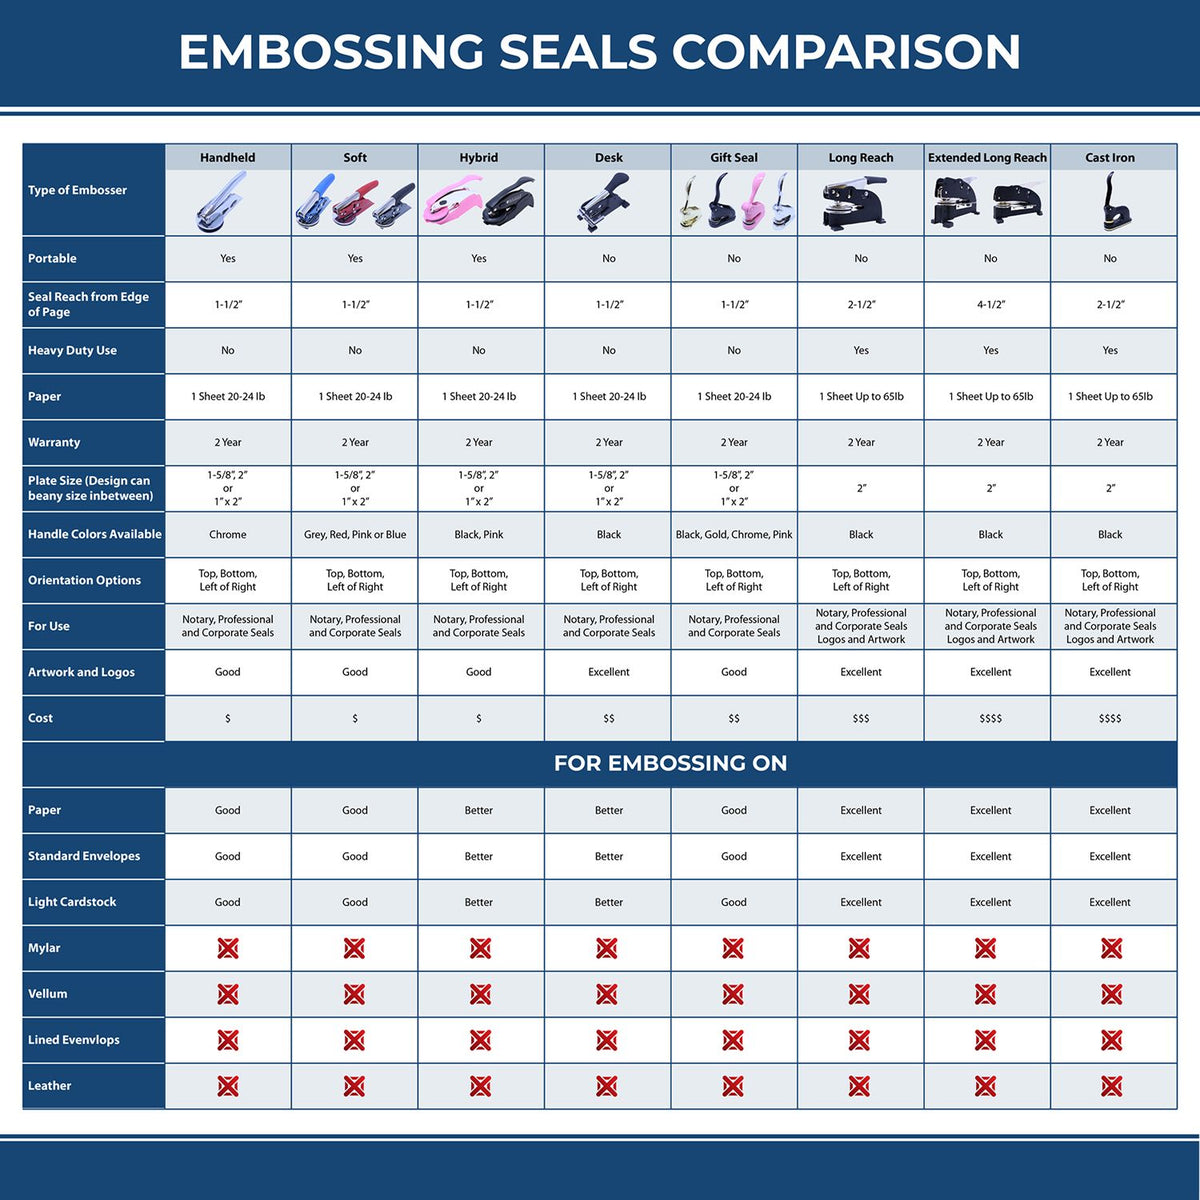 A comparison chart for the different types of mount models available for the Soft Colorado Professional Geologist Seal